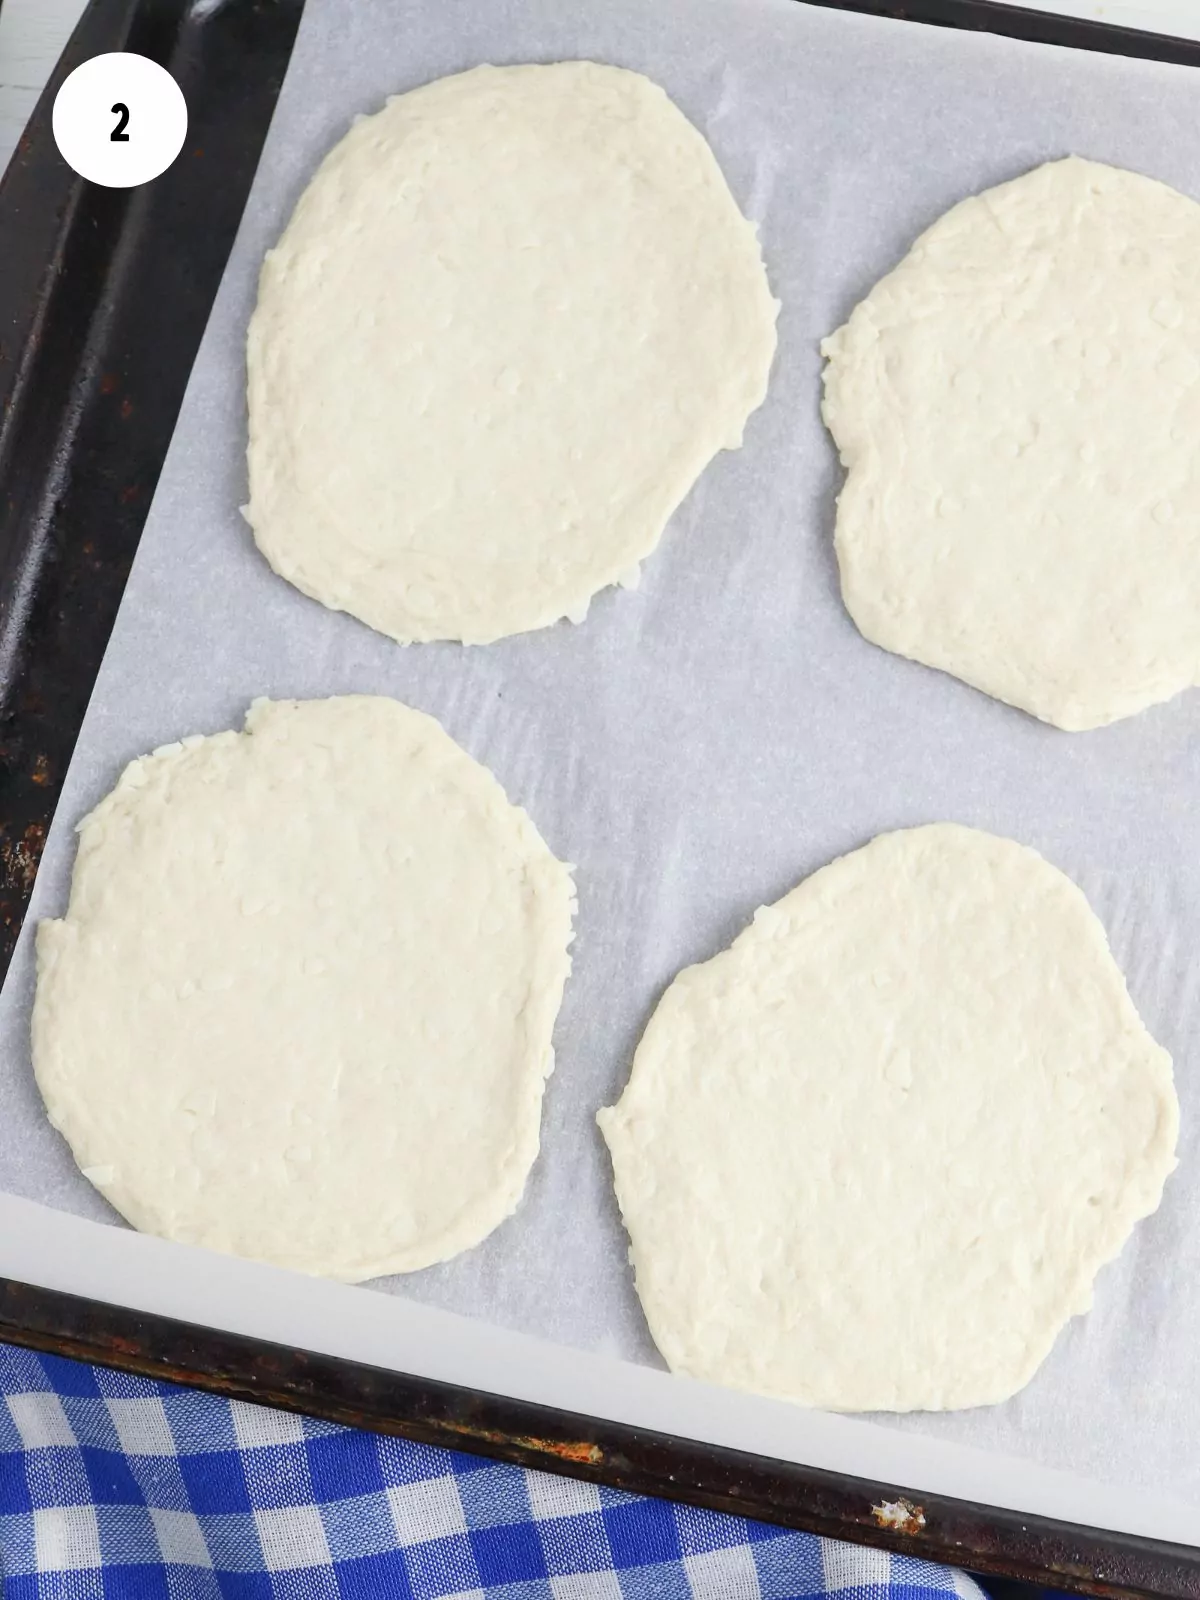 rolled out biscuits on a parchment lined baking tray